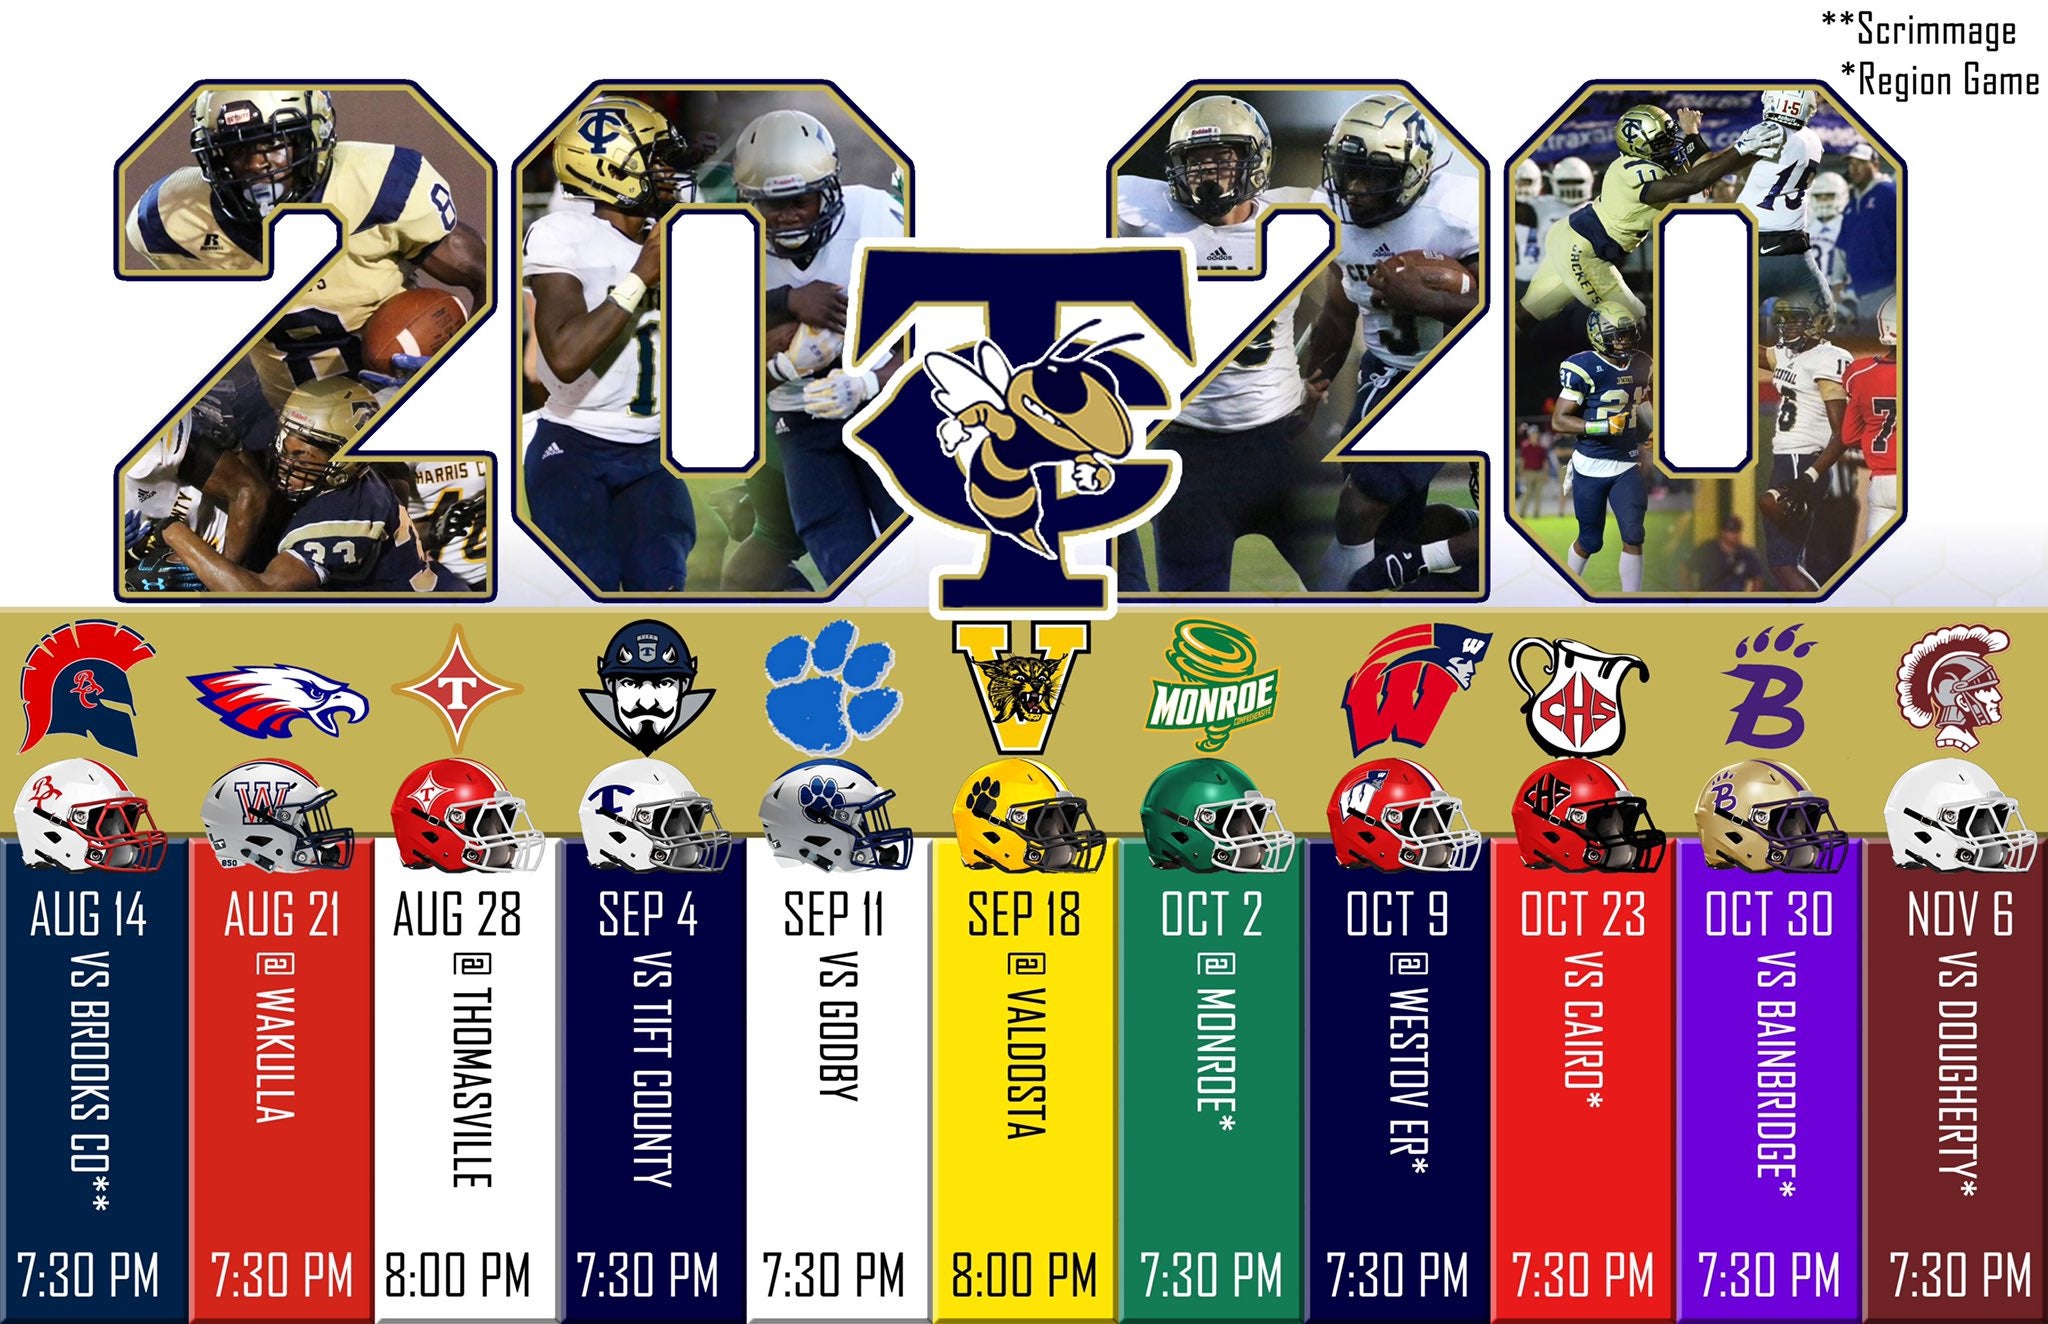 Thomas co. Central football schedule 2020